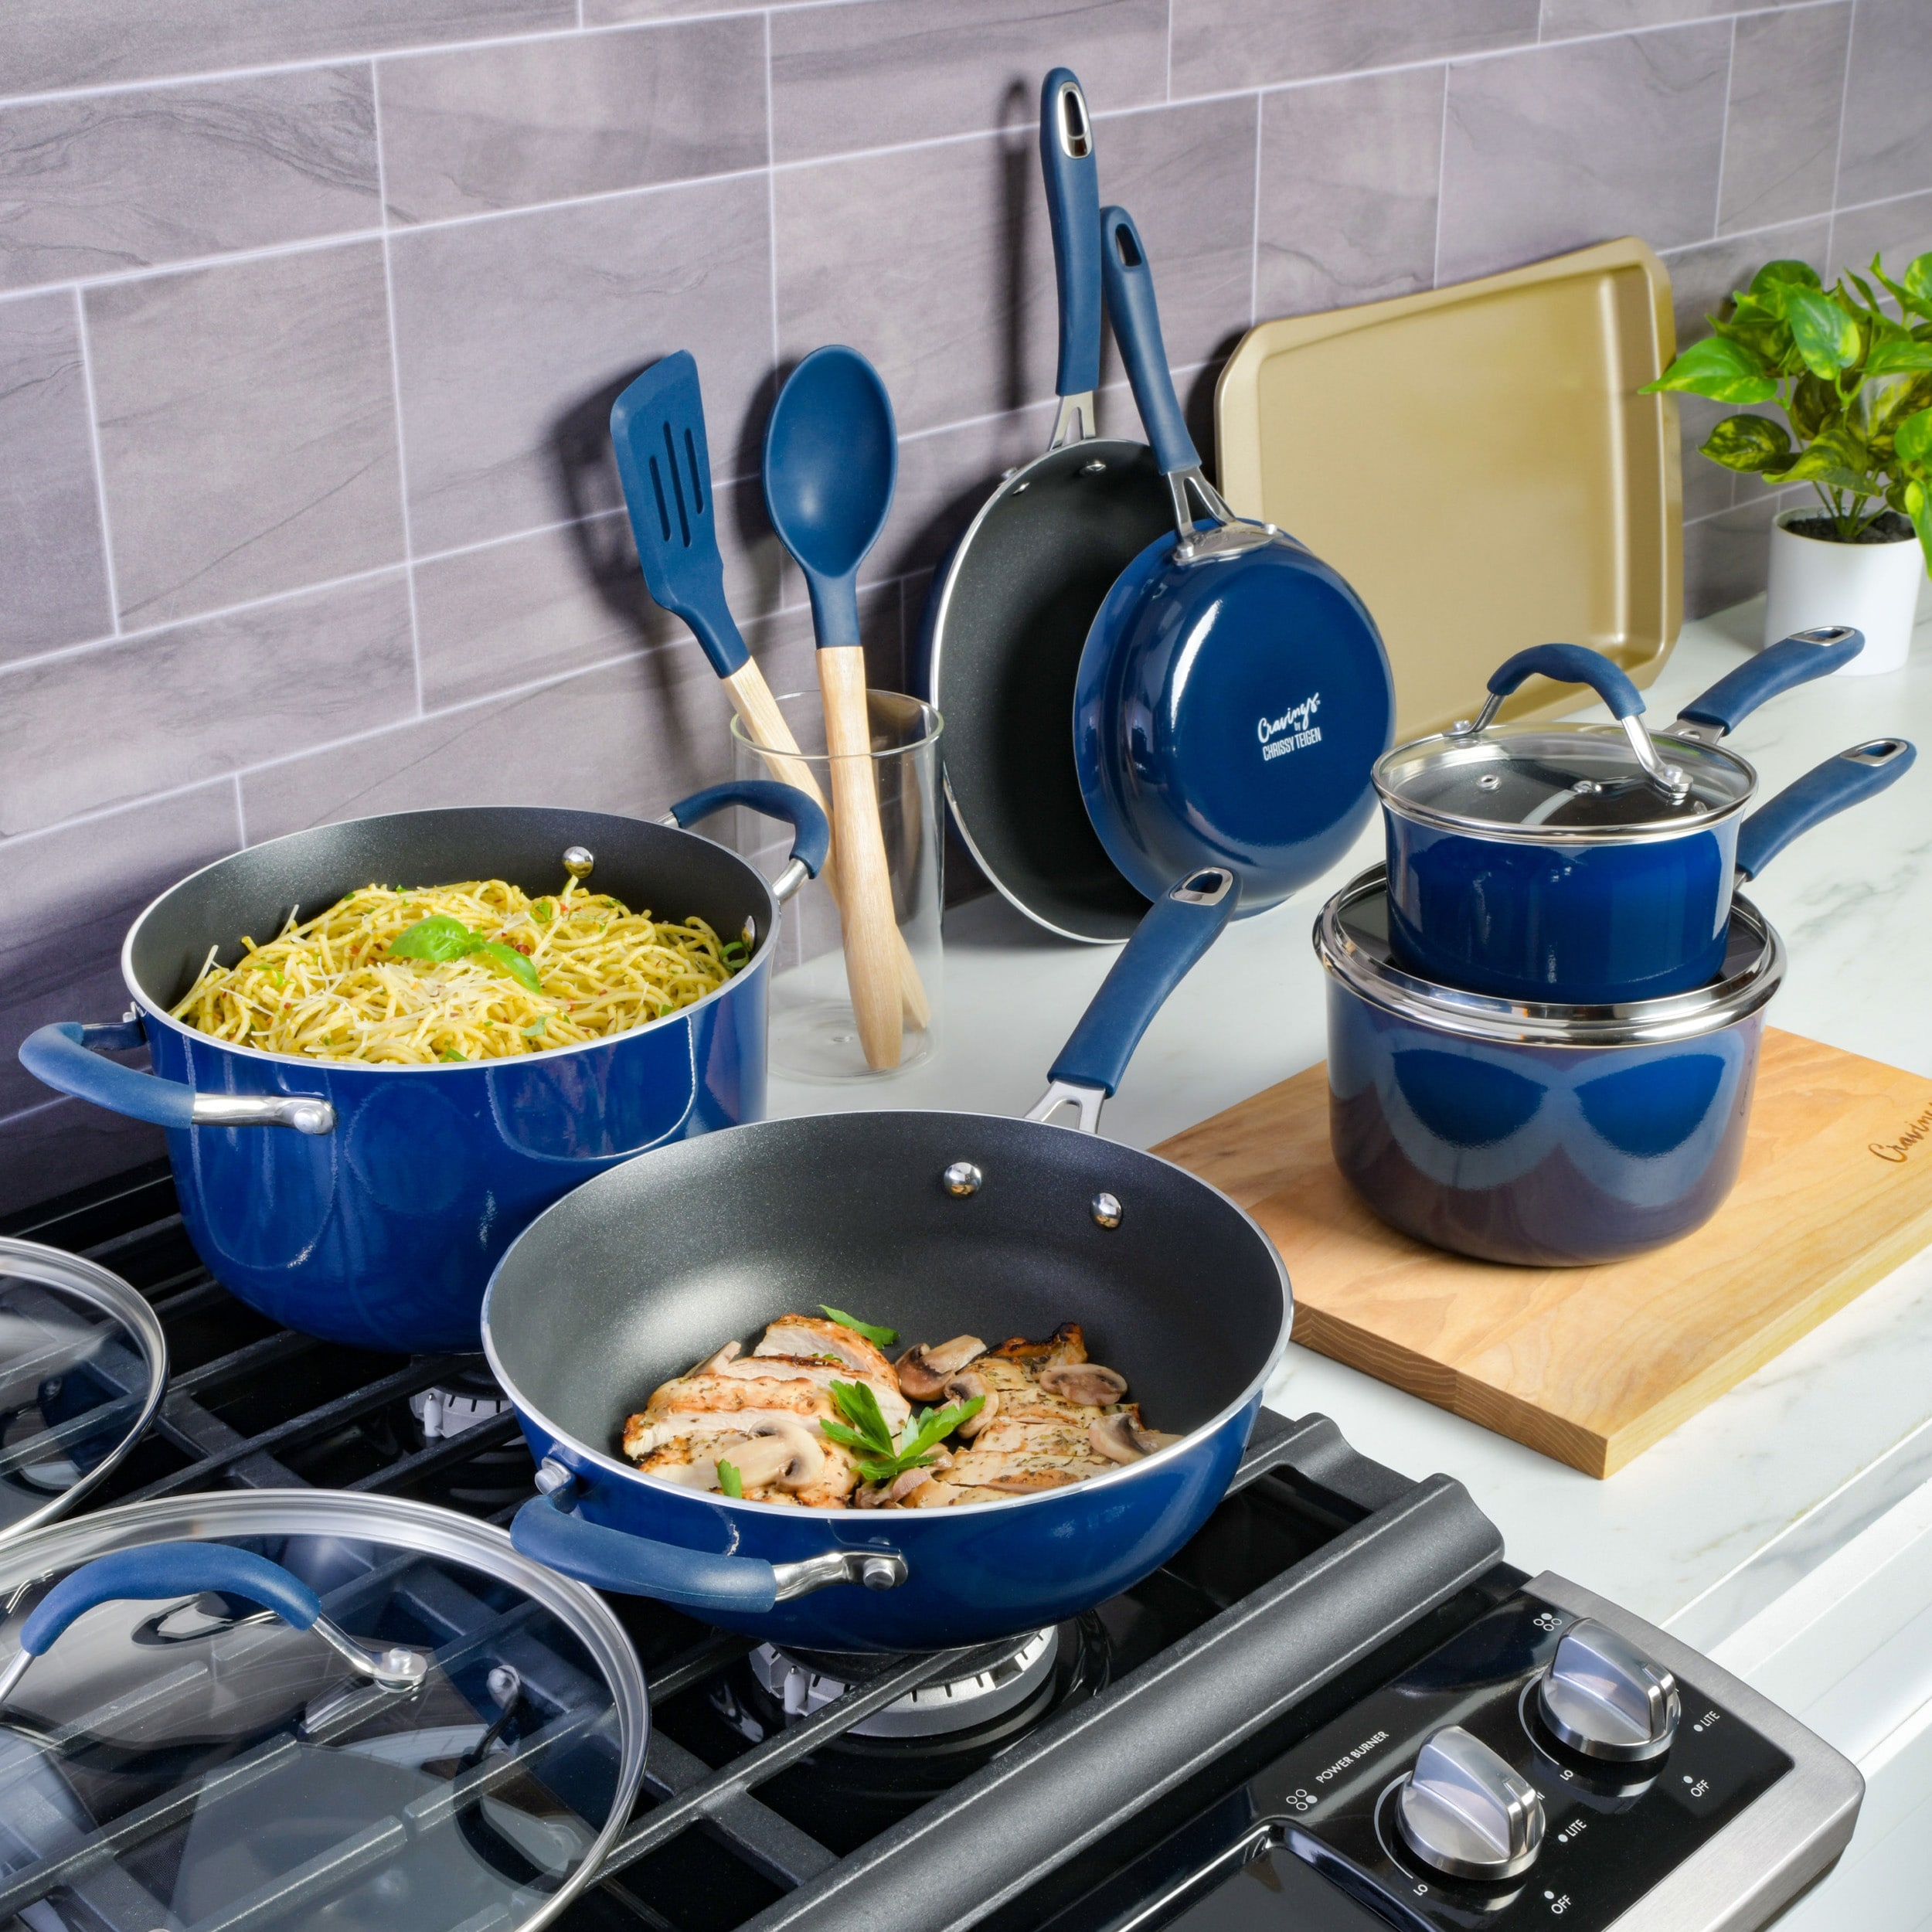 Cravings by Chrissy Teigen 14Pc Aluminum Cookware Combo Set in Blue